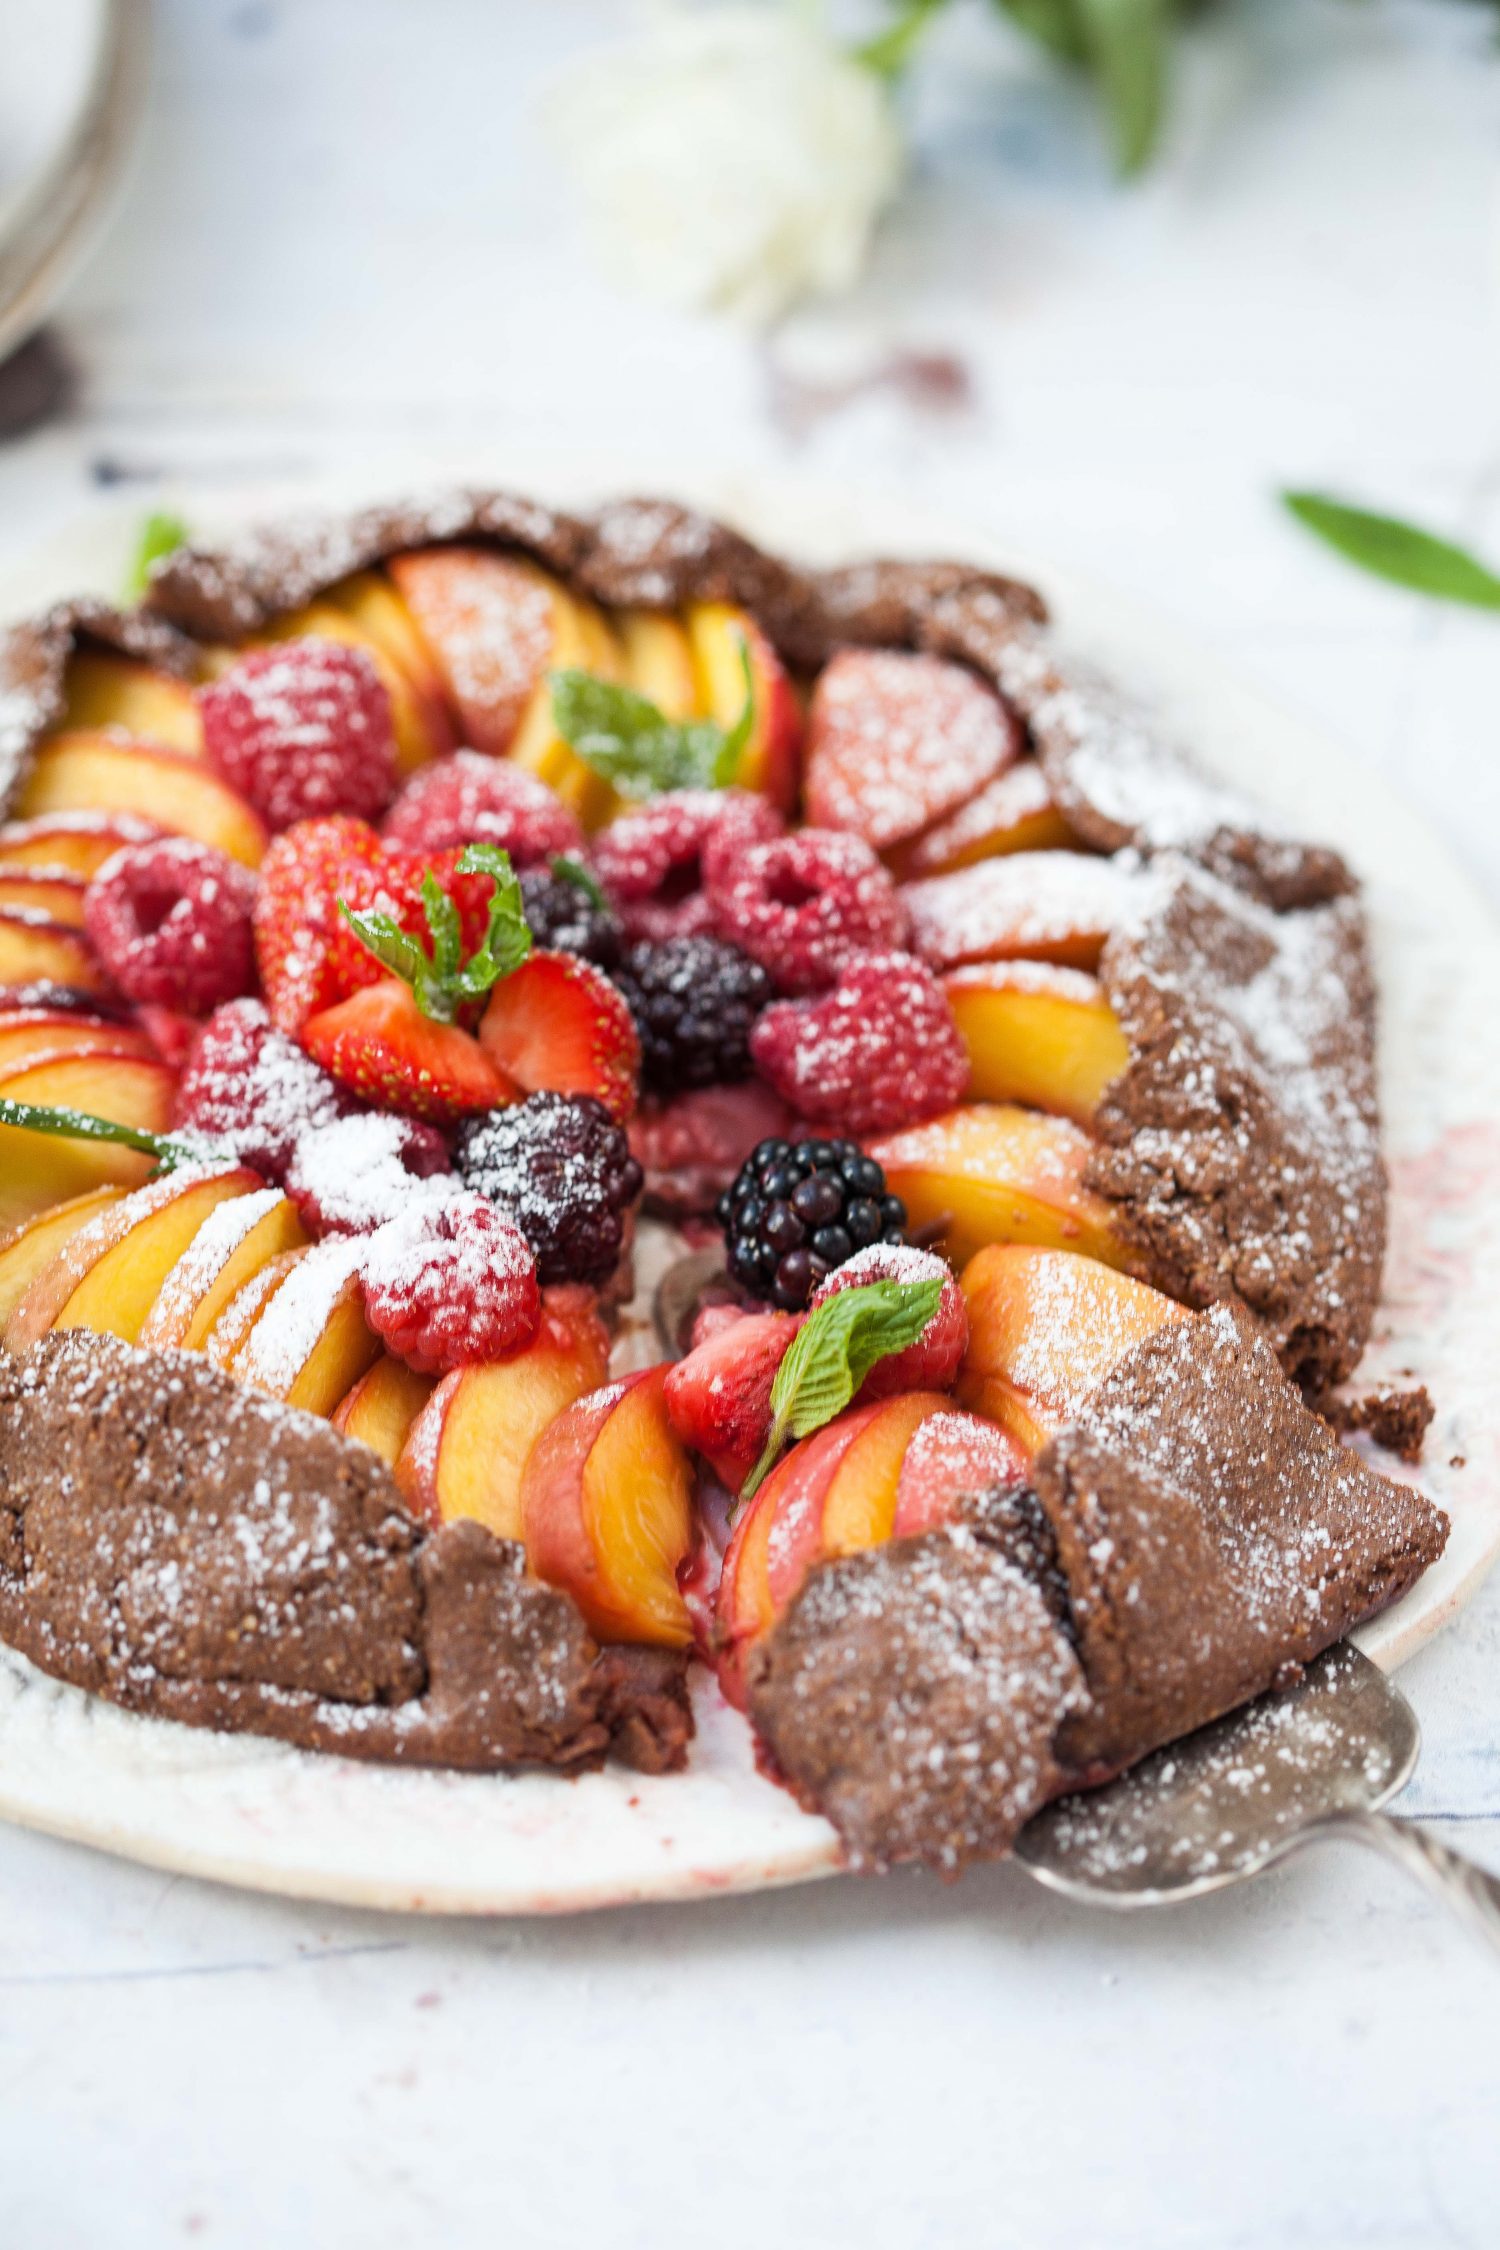 Peach, Berry and Cocoa Galette